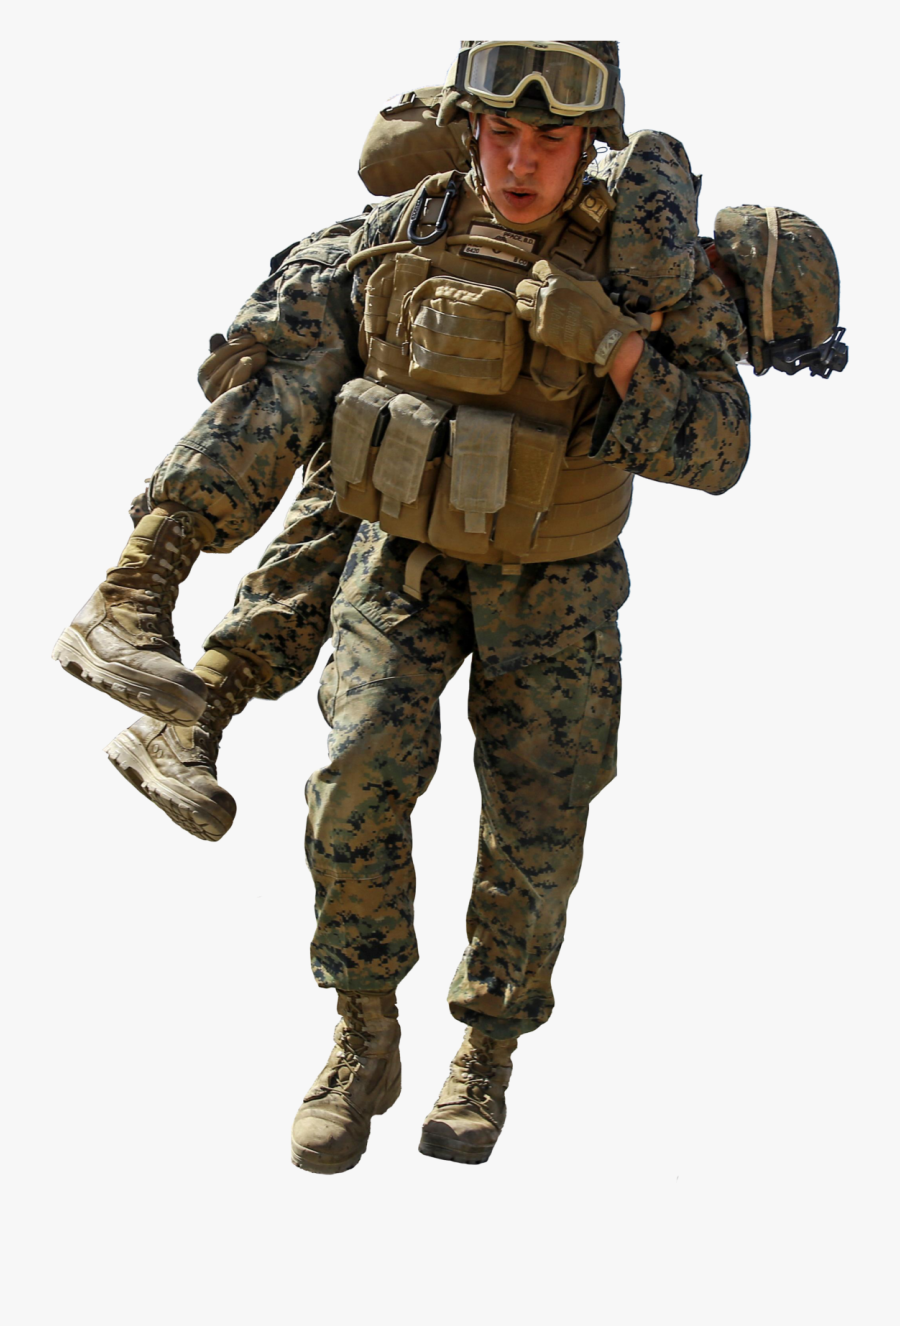 Transparent Support Our Troops Png - Soldier, Transparent Clipart